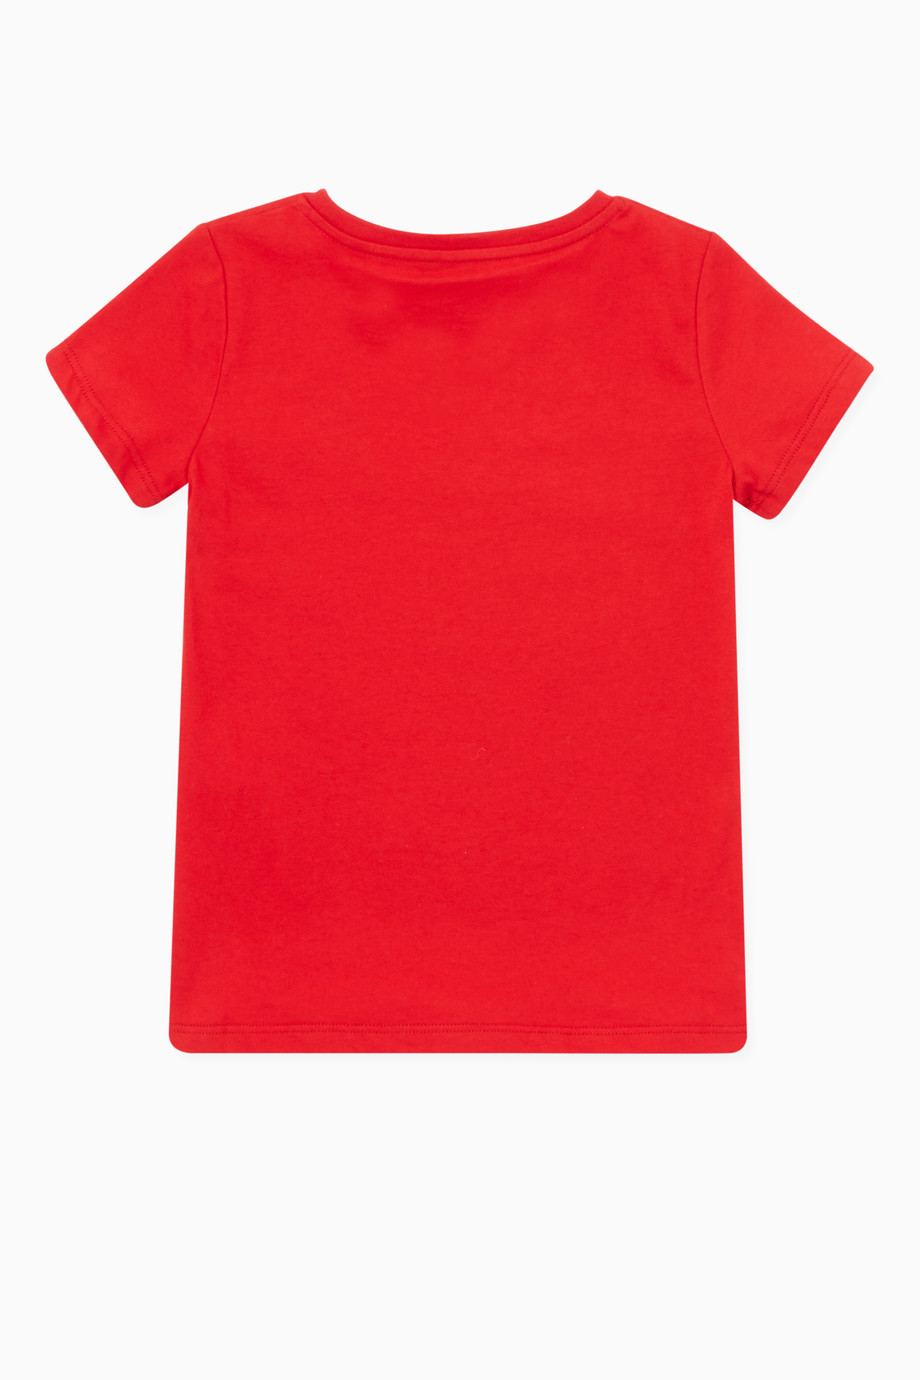 Shop Gucci Red Strawberry Print T-Shirt for Kids | Ounass UAE